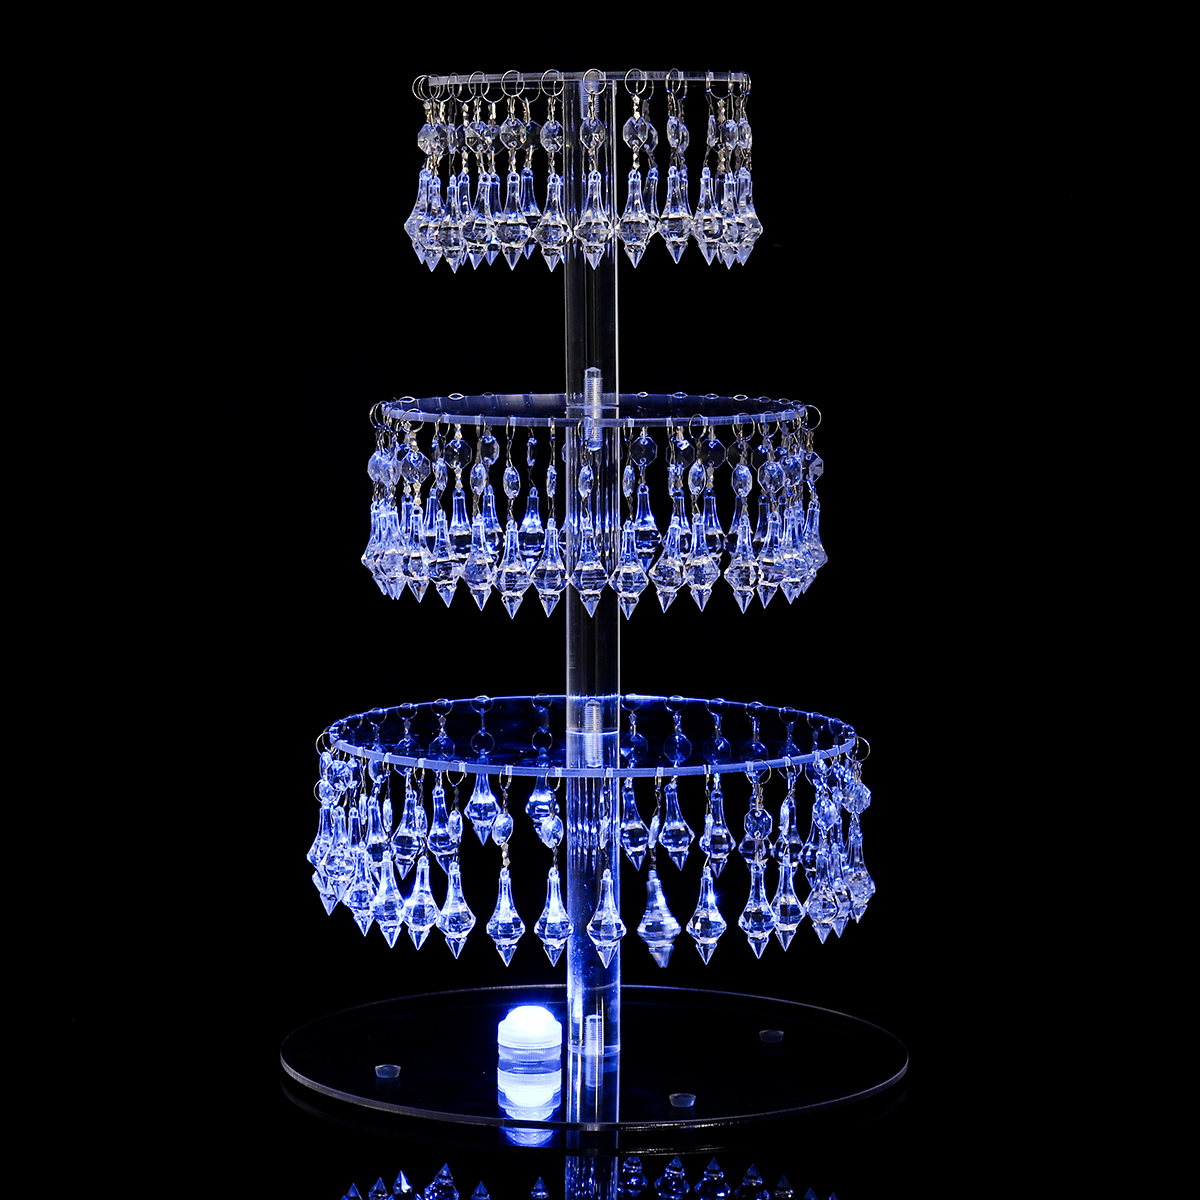 4-Layer-Acrylic-Cake-Stand-Remote-Control-LED-Light-Cupcake-Party-Display-Rack-1828525-2